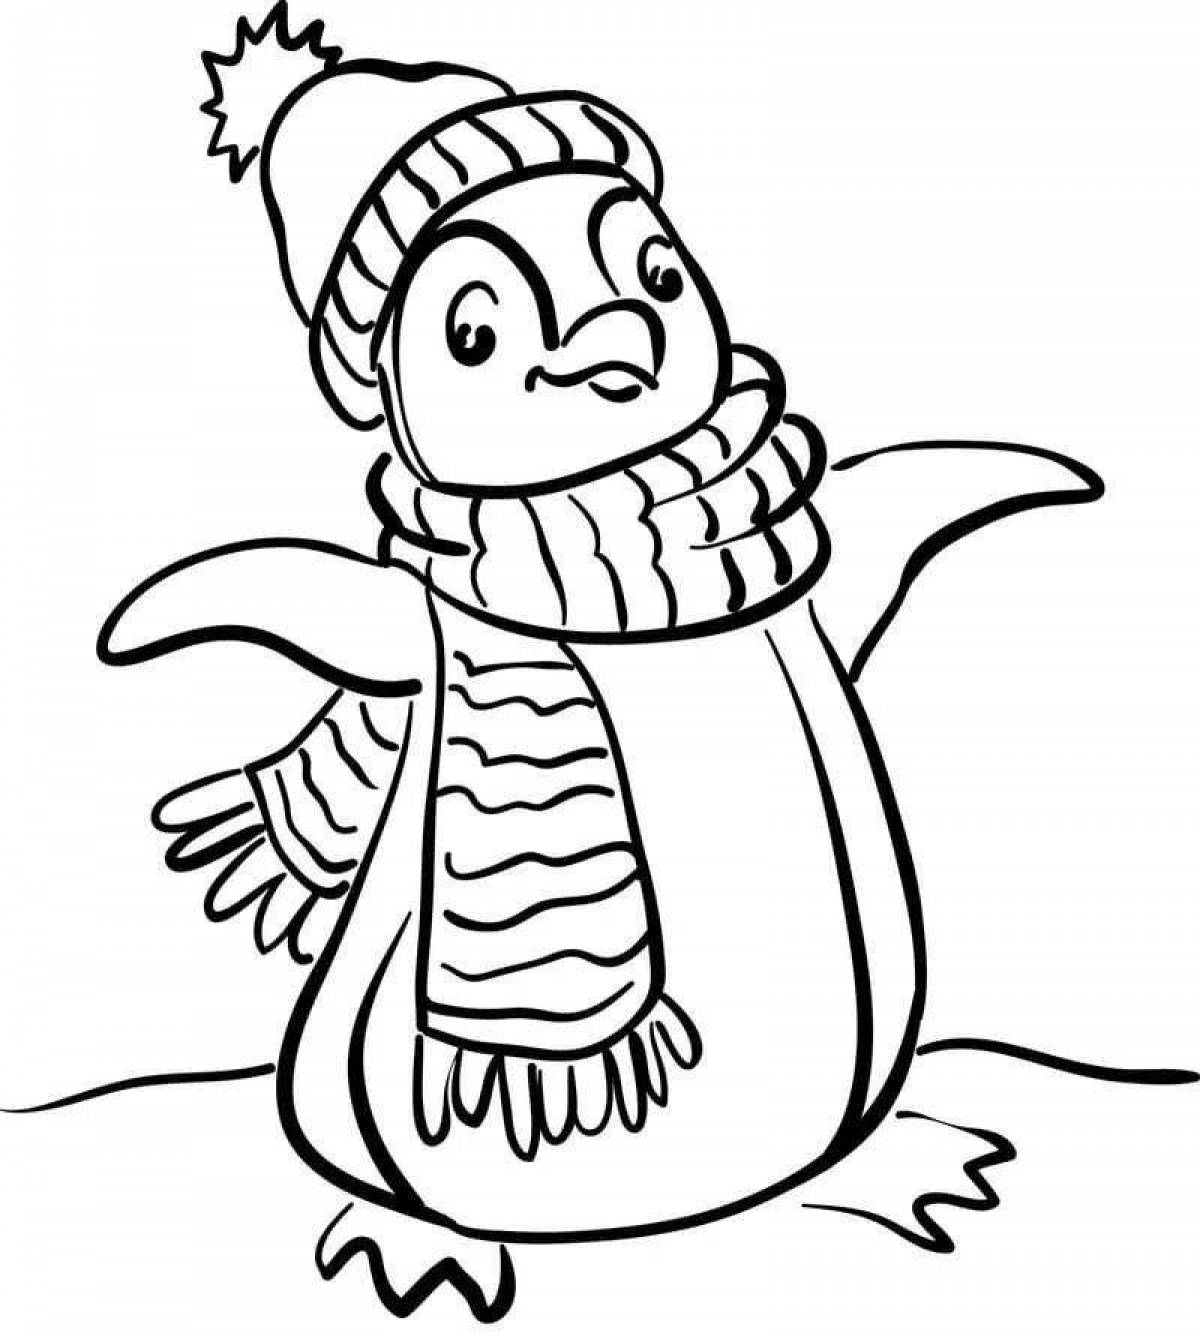 Glitter penguin coloring pages